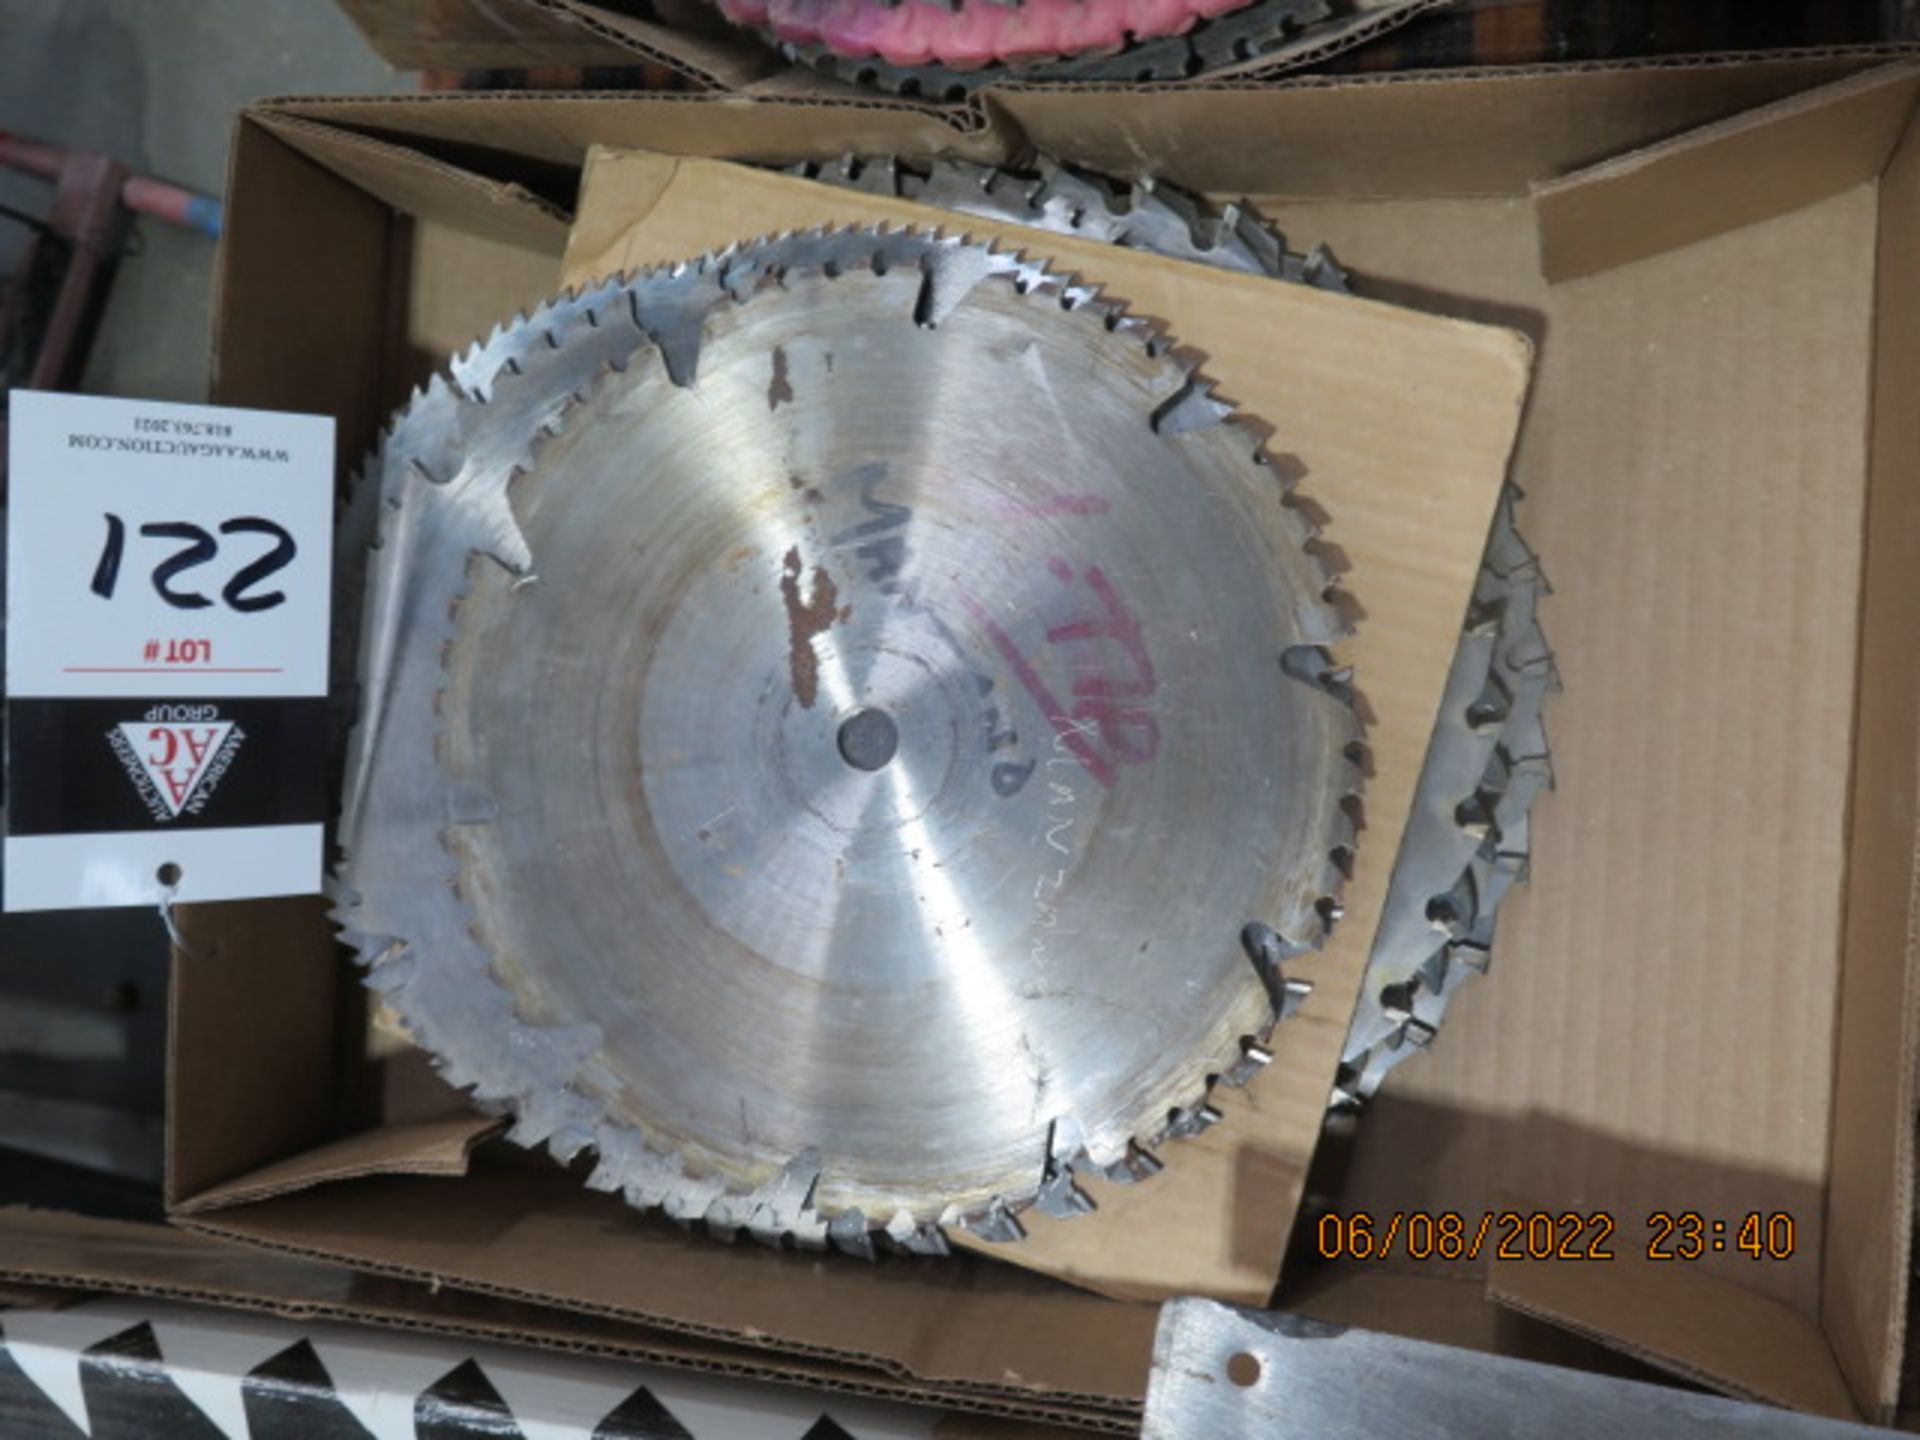 Saw Blades (SOLD AS-IS - NO WARRANTY)